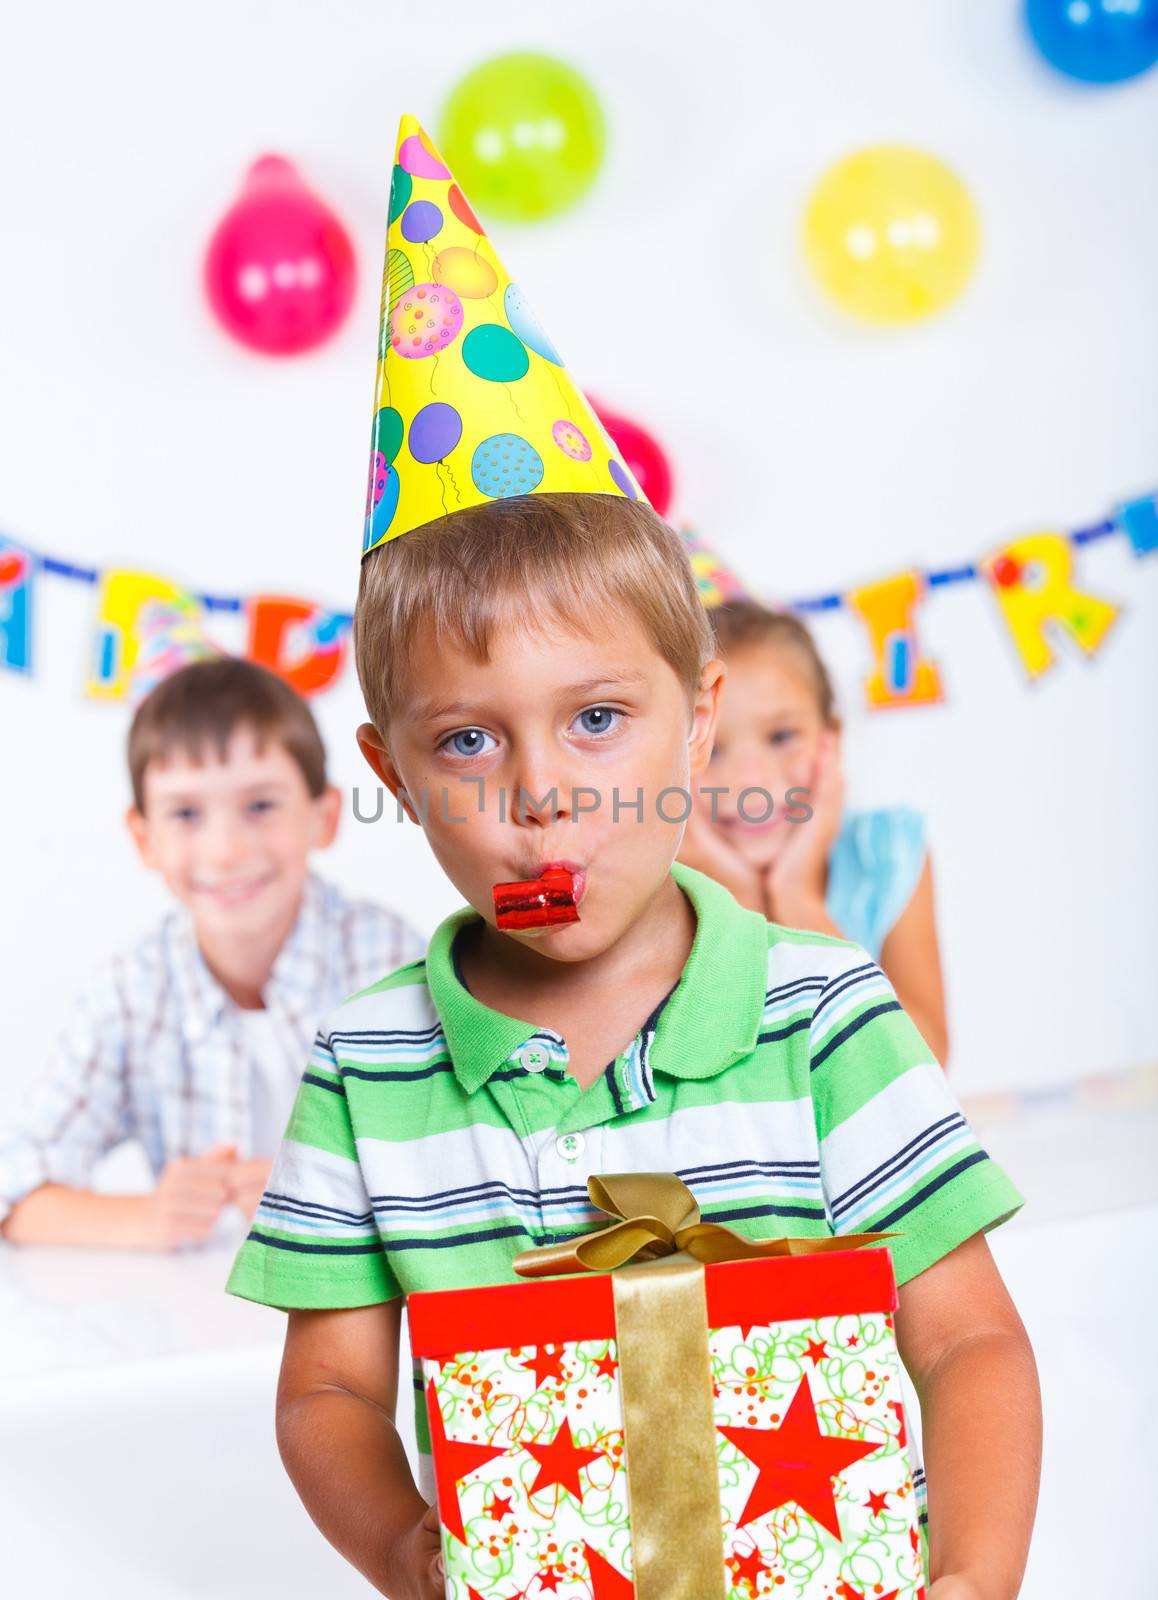 Handsome boy with giftbox looking at camera having fun at birthday party with his friends on background